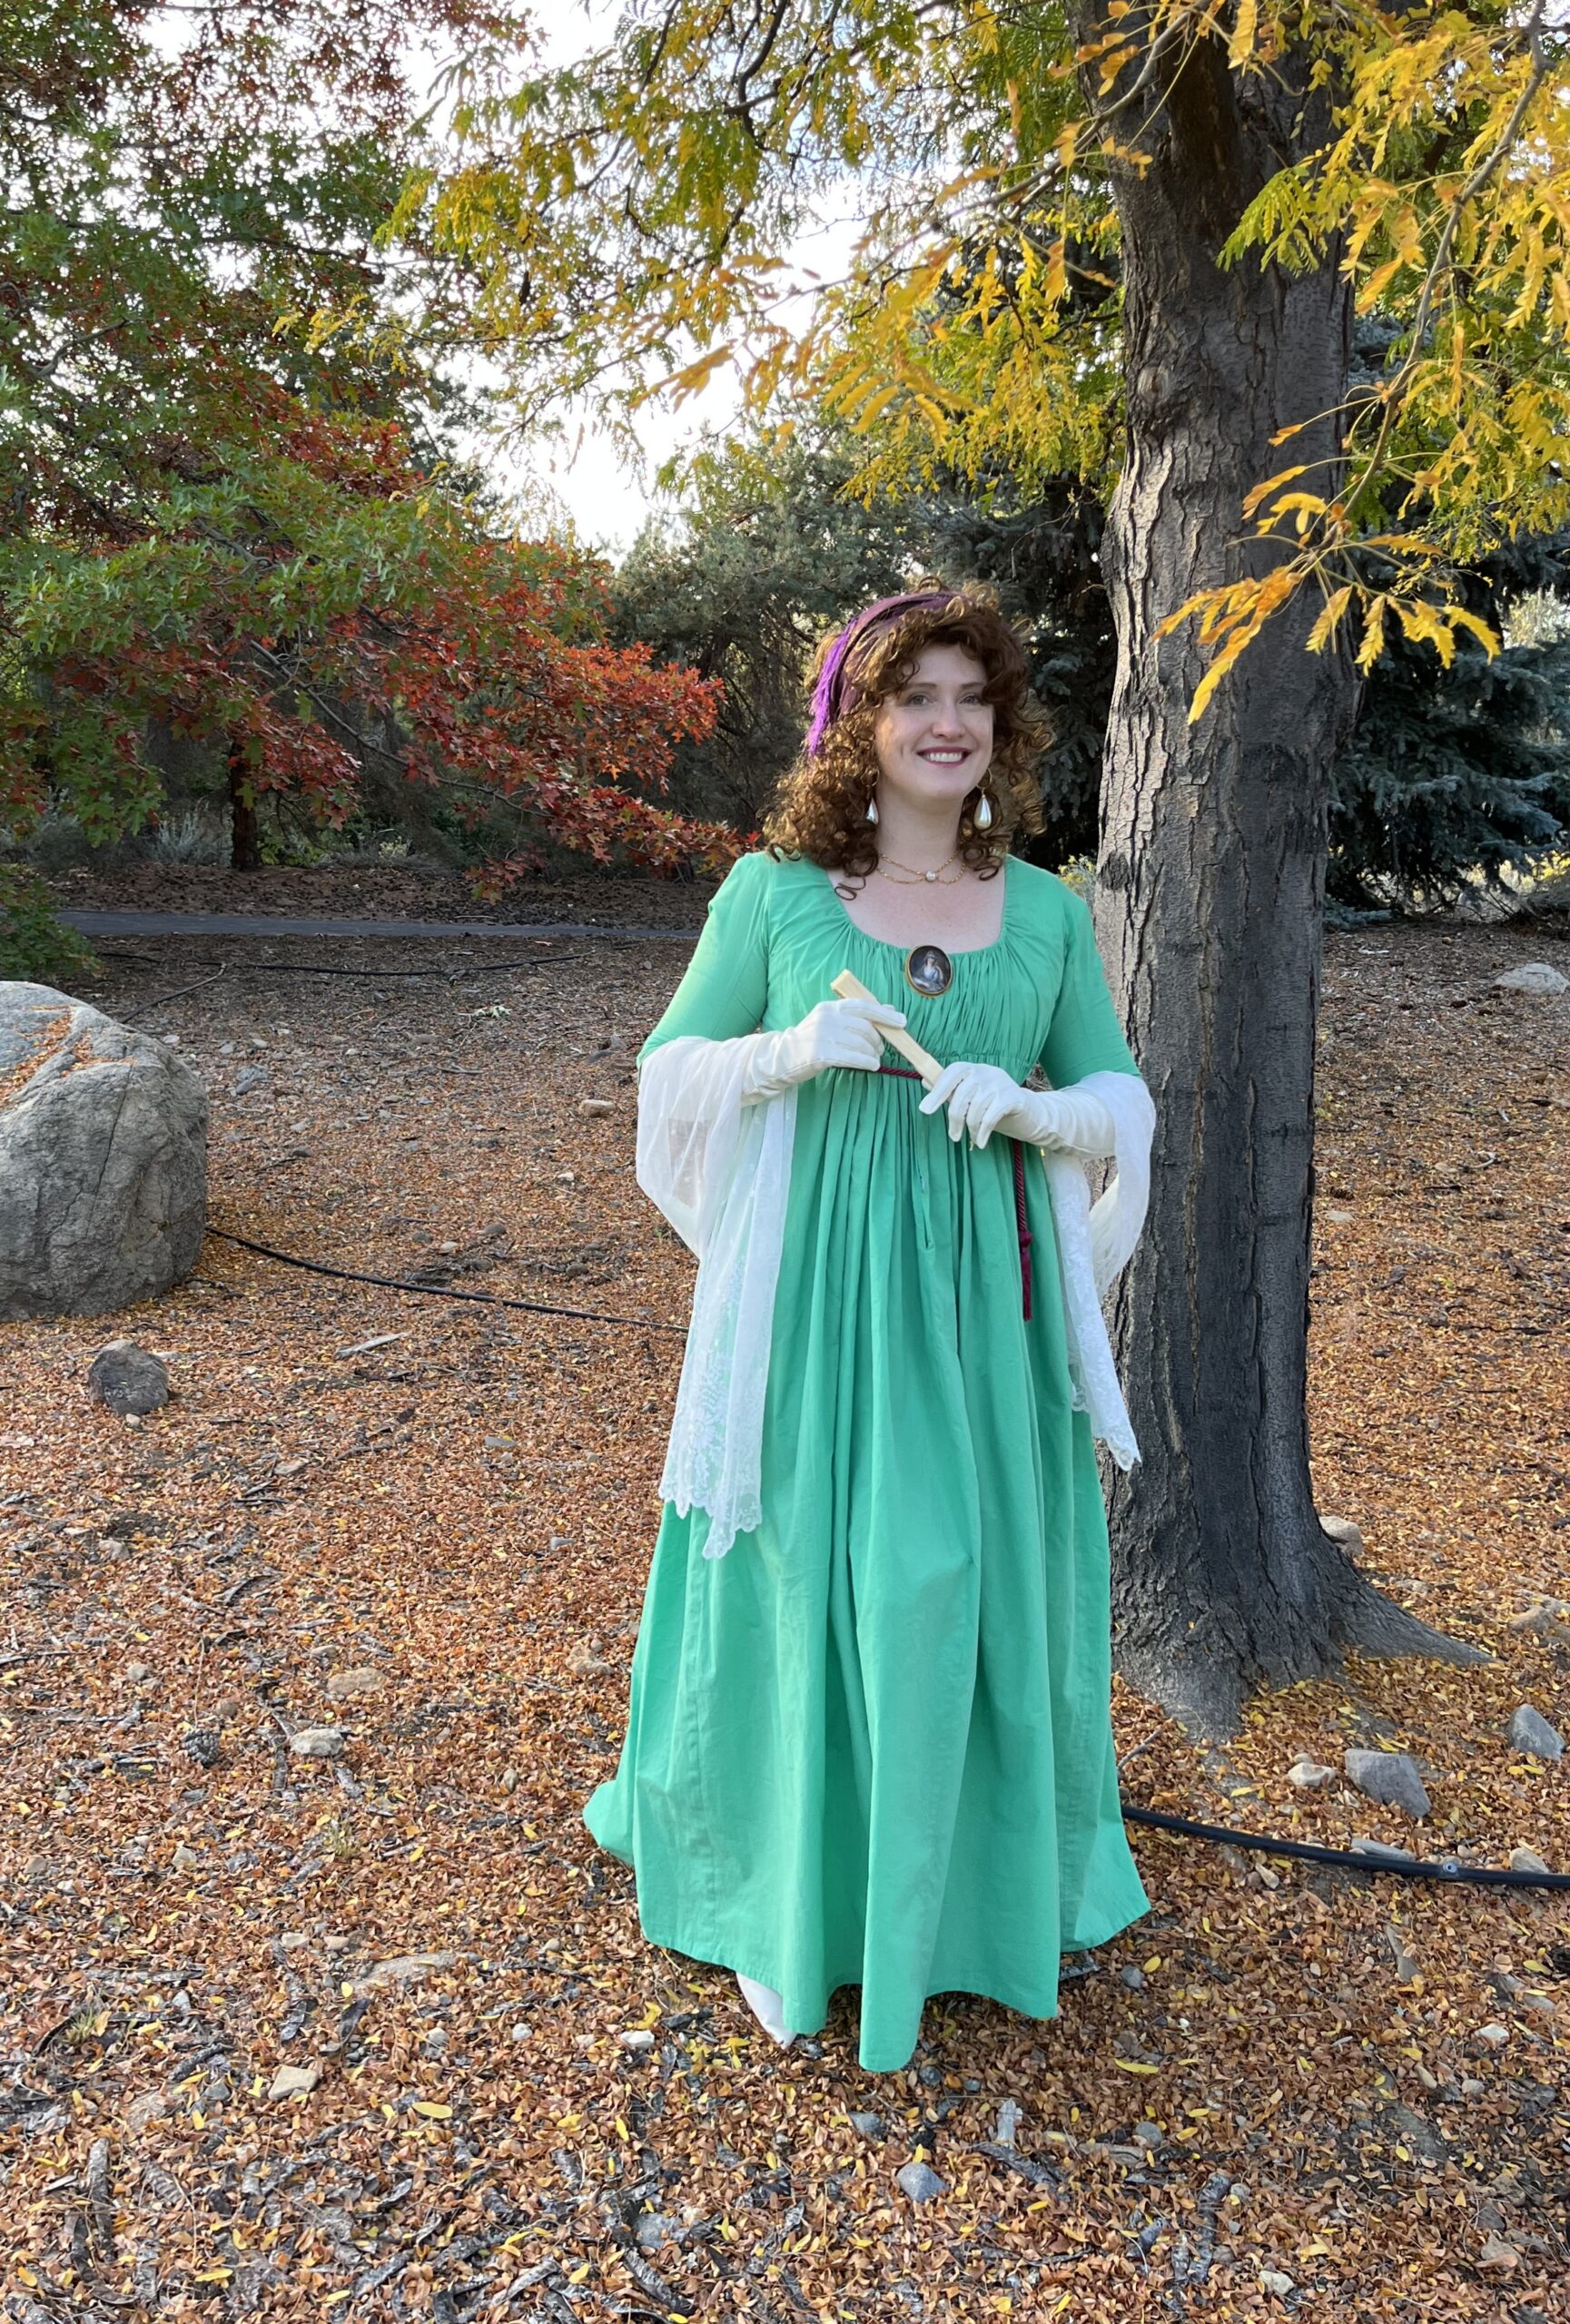 Tabubilgirl in a green 1790s round gown stand beneath a tree holding a vintage celluloid fan.